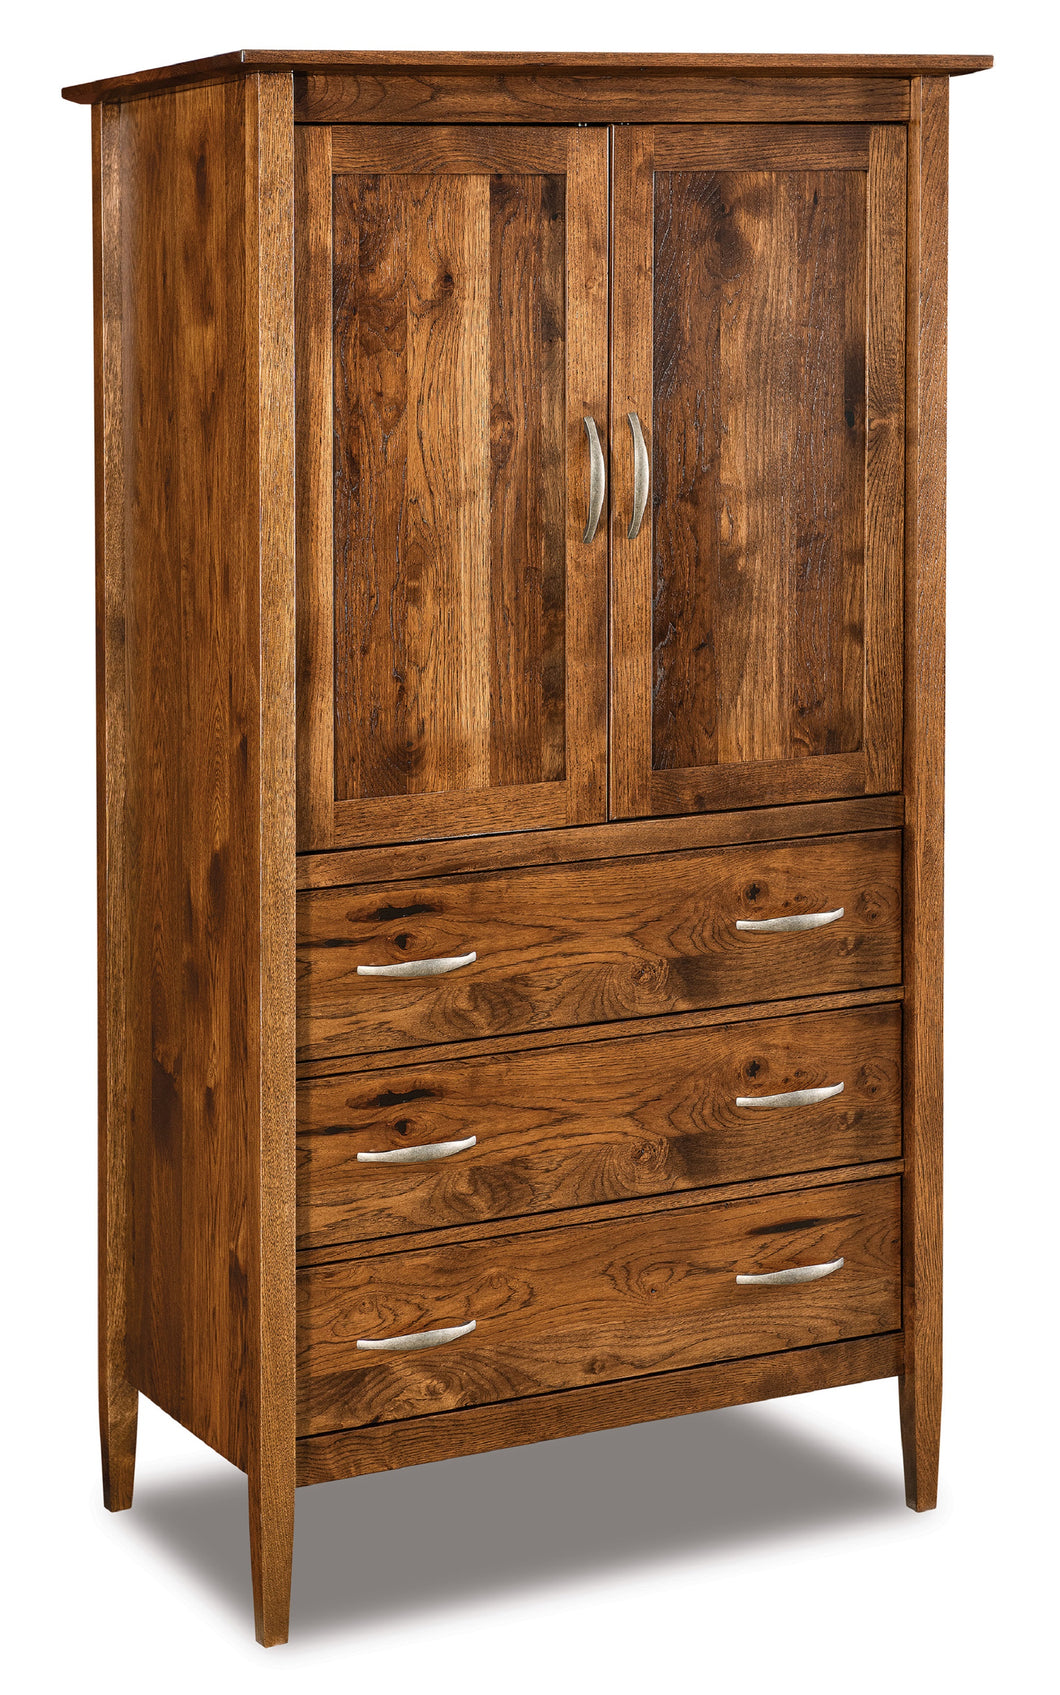 Imperial Armoire